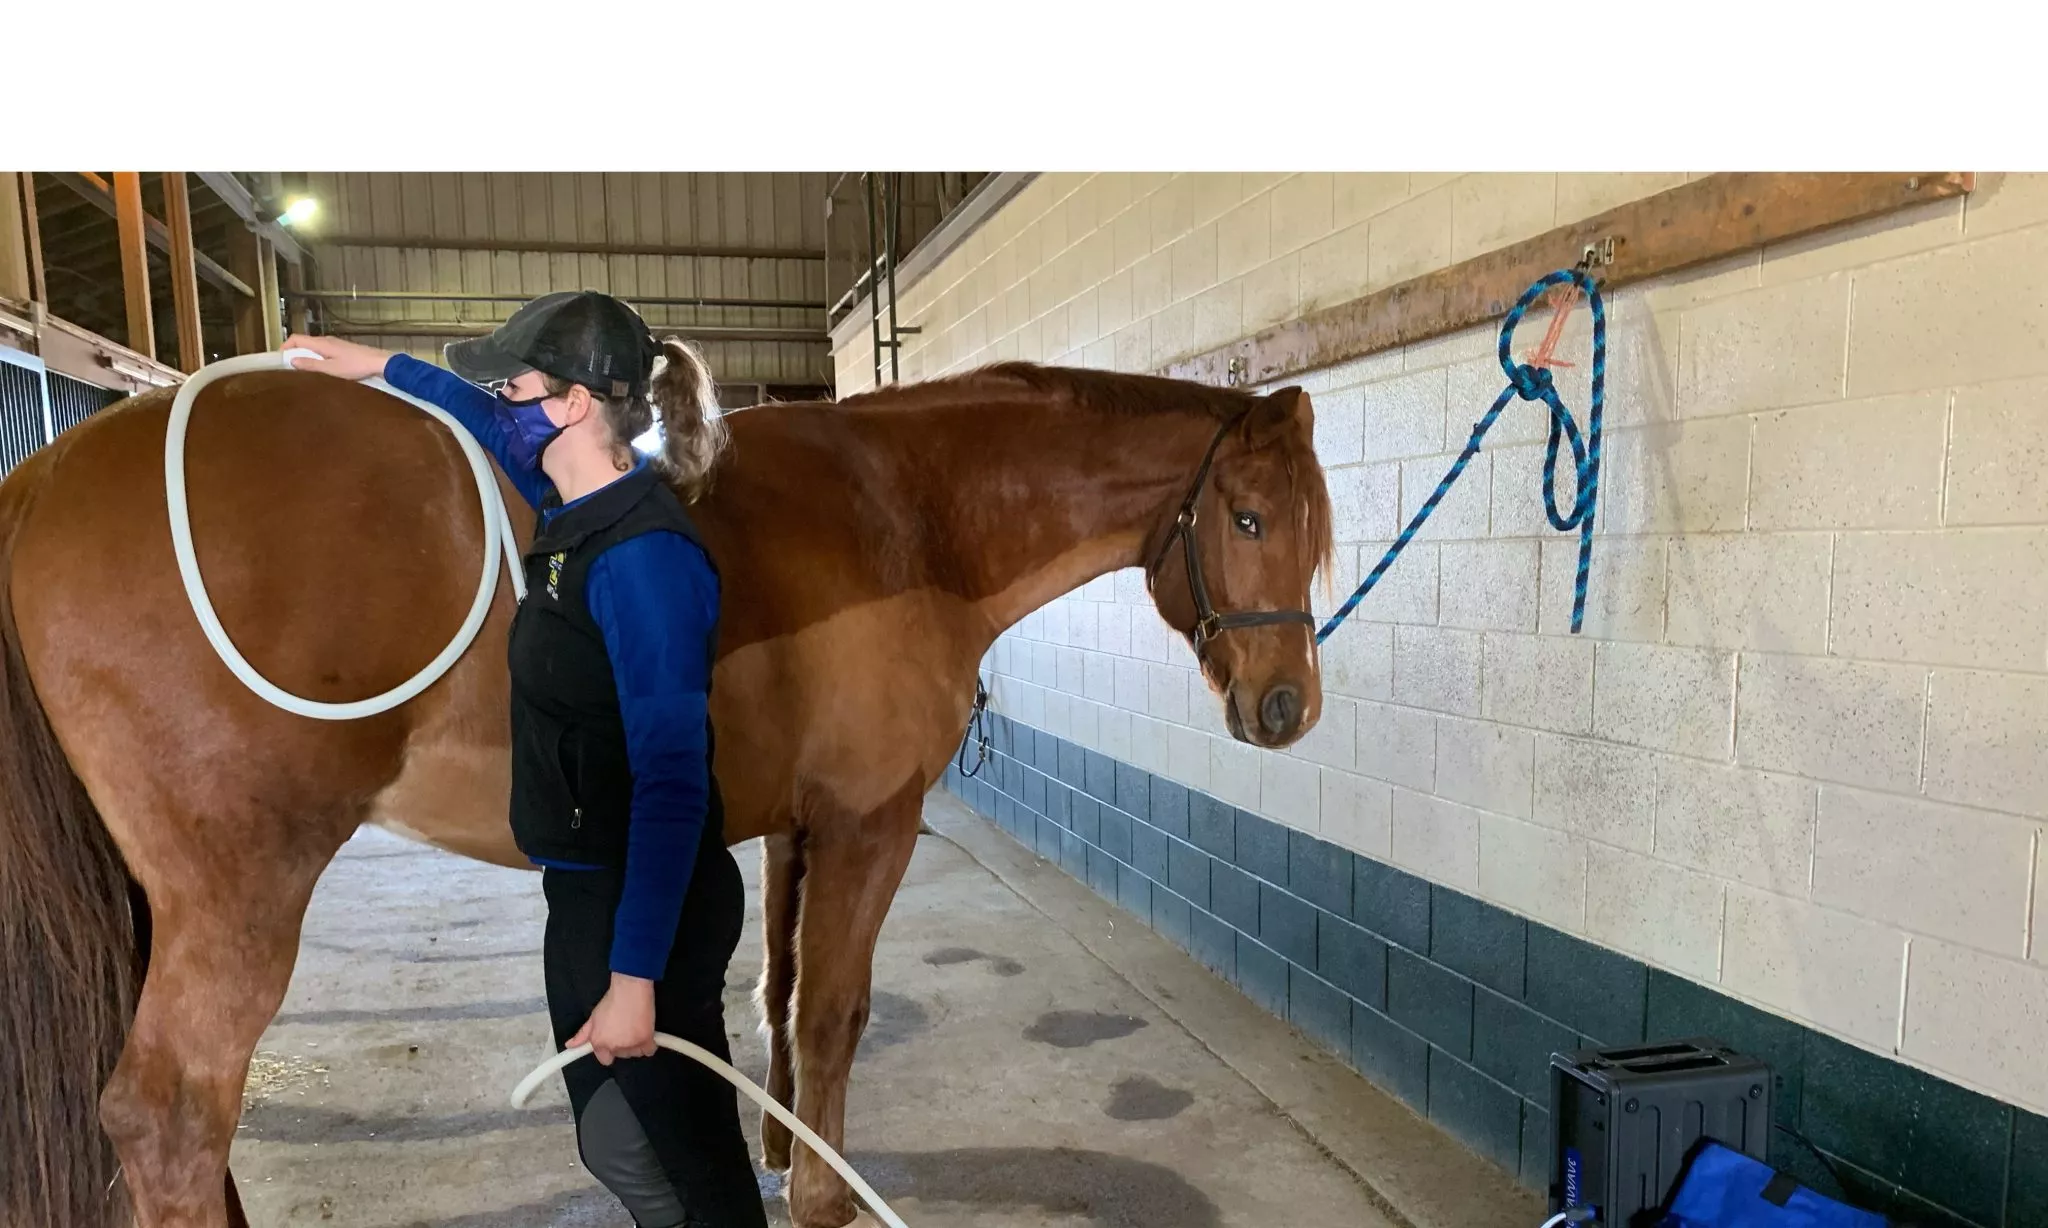 bucking horse getting maganwave treatment